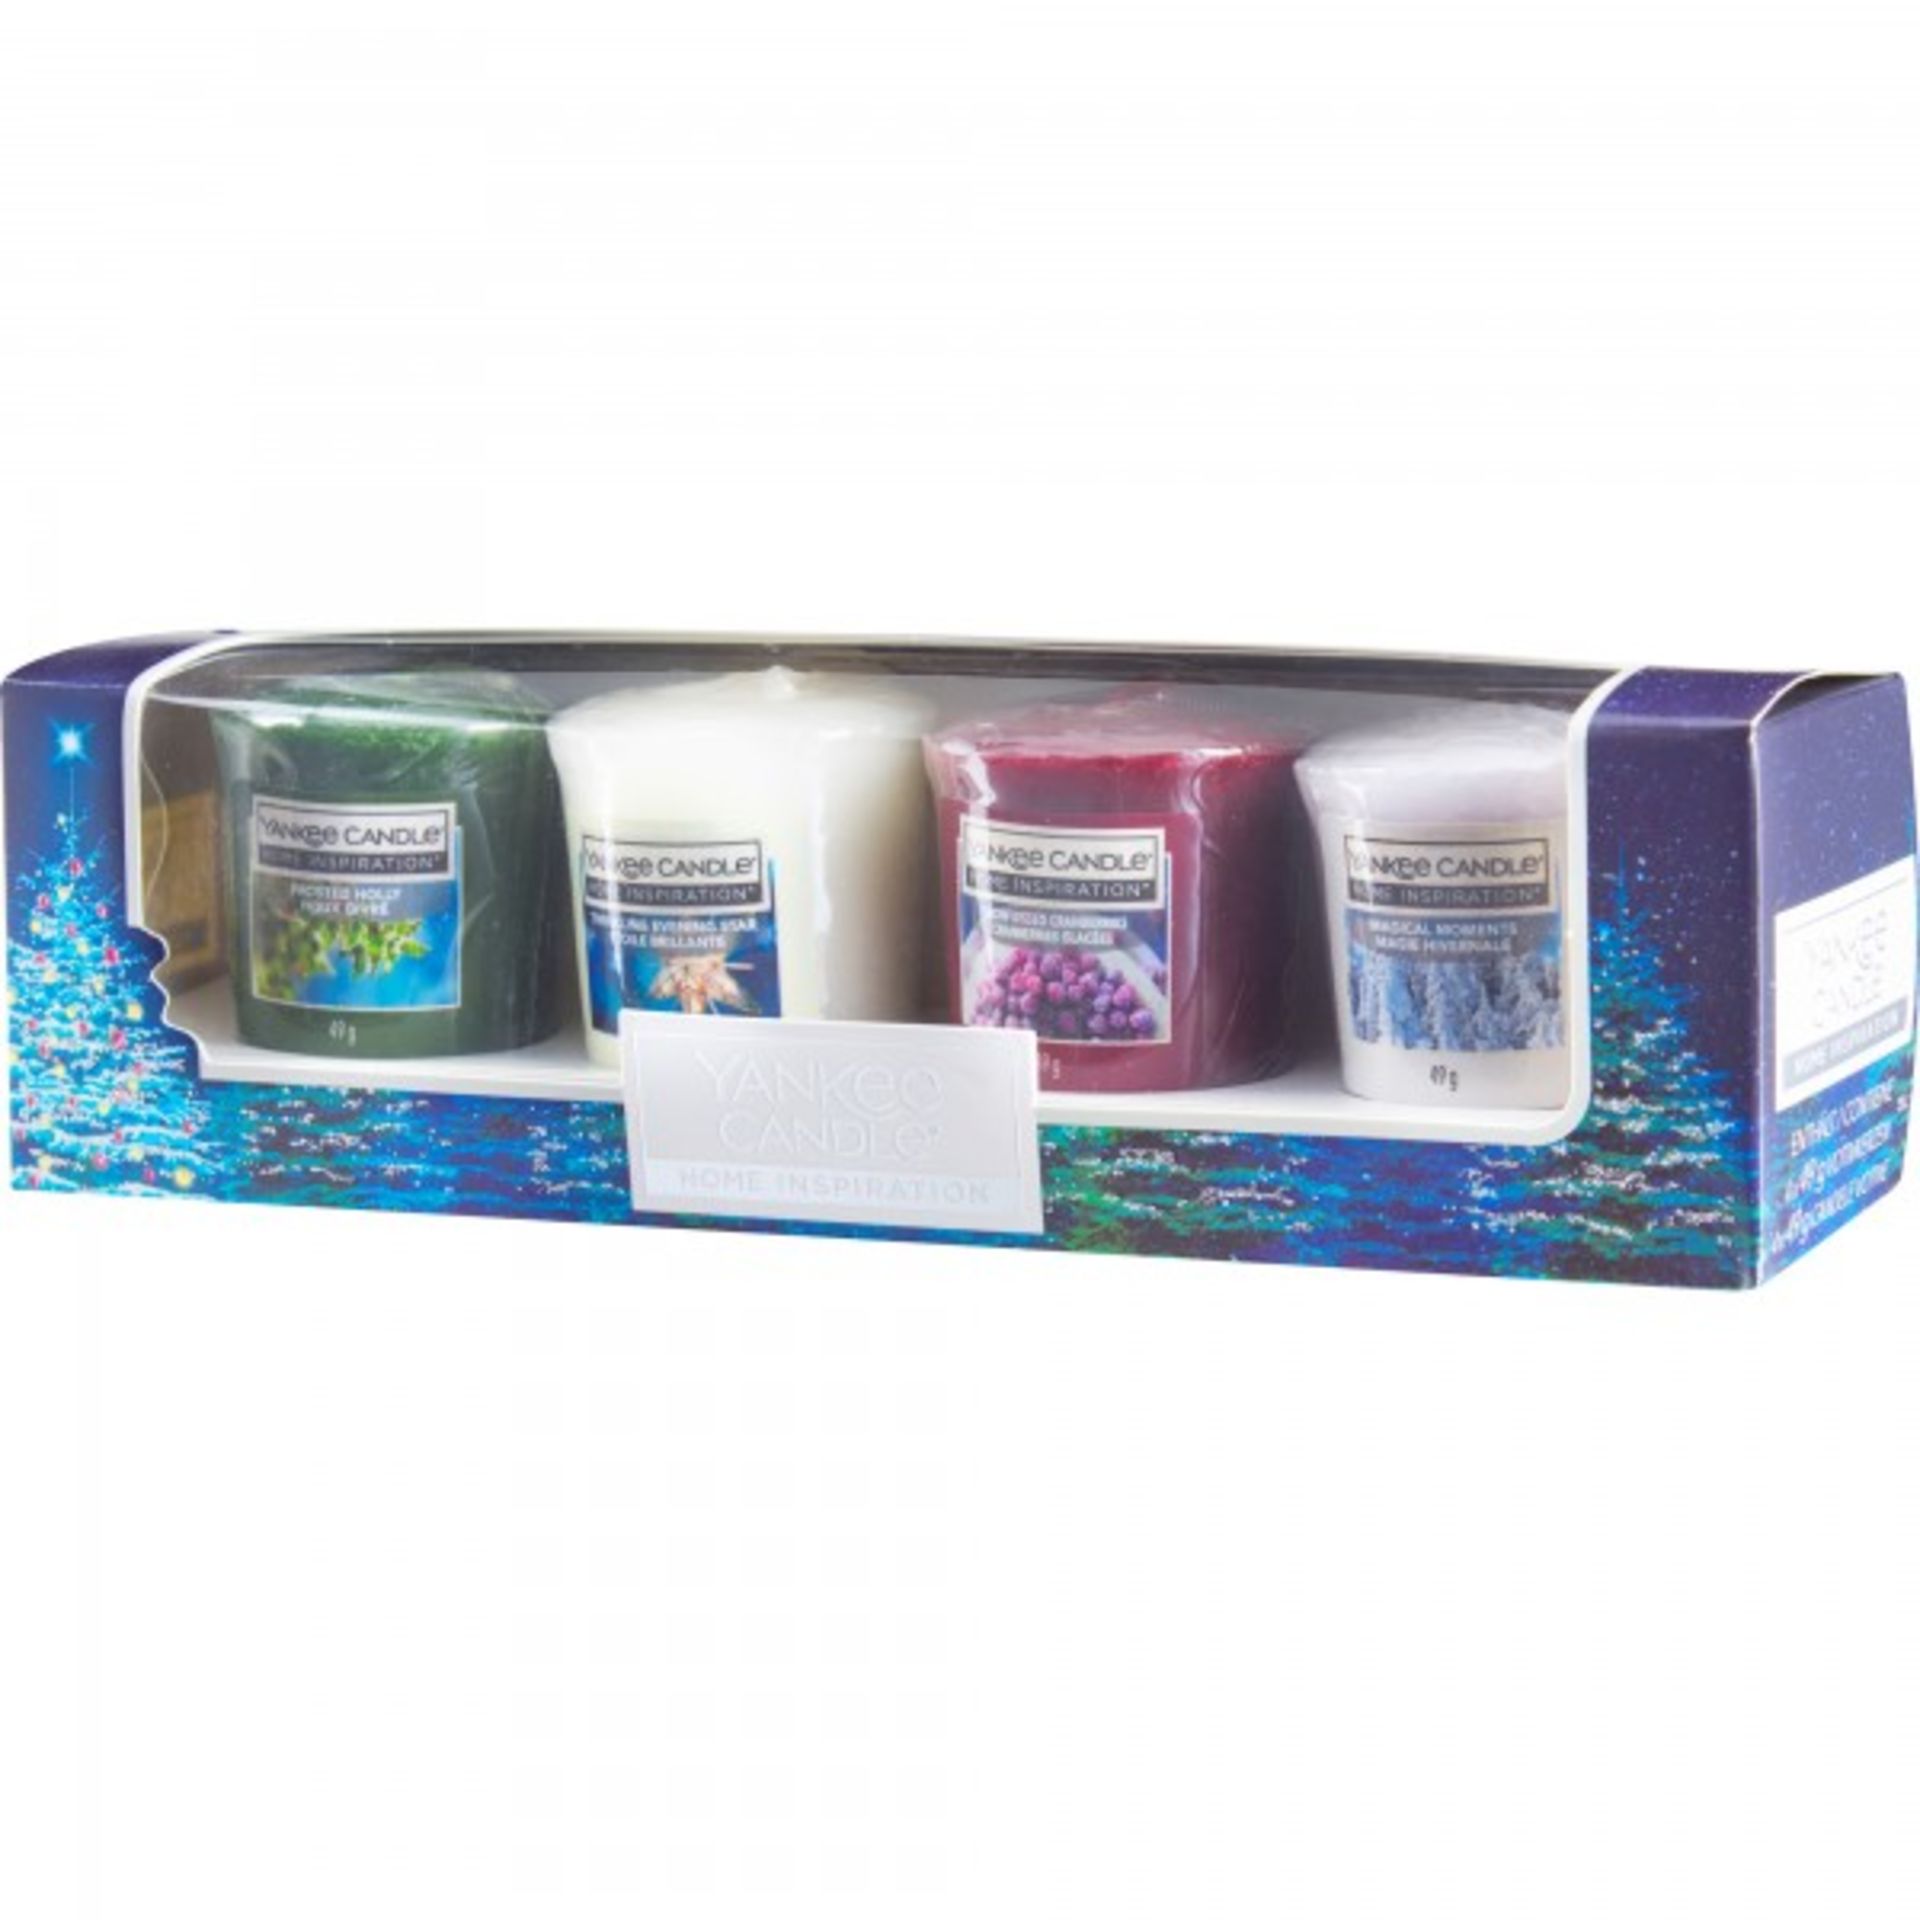 + VAT Brand New Four Piece Yankee Candle Gift Set - Item Is Available Approx 5 Working Days After